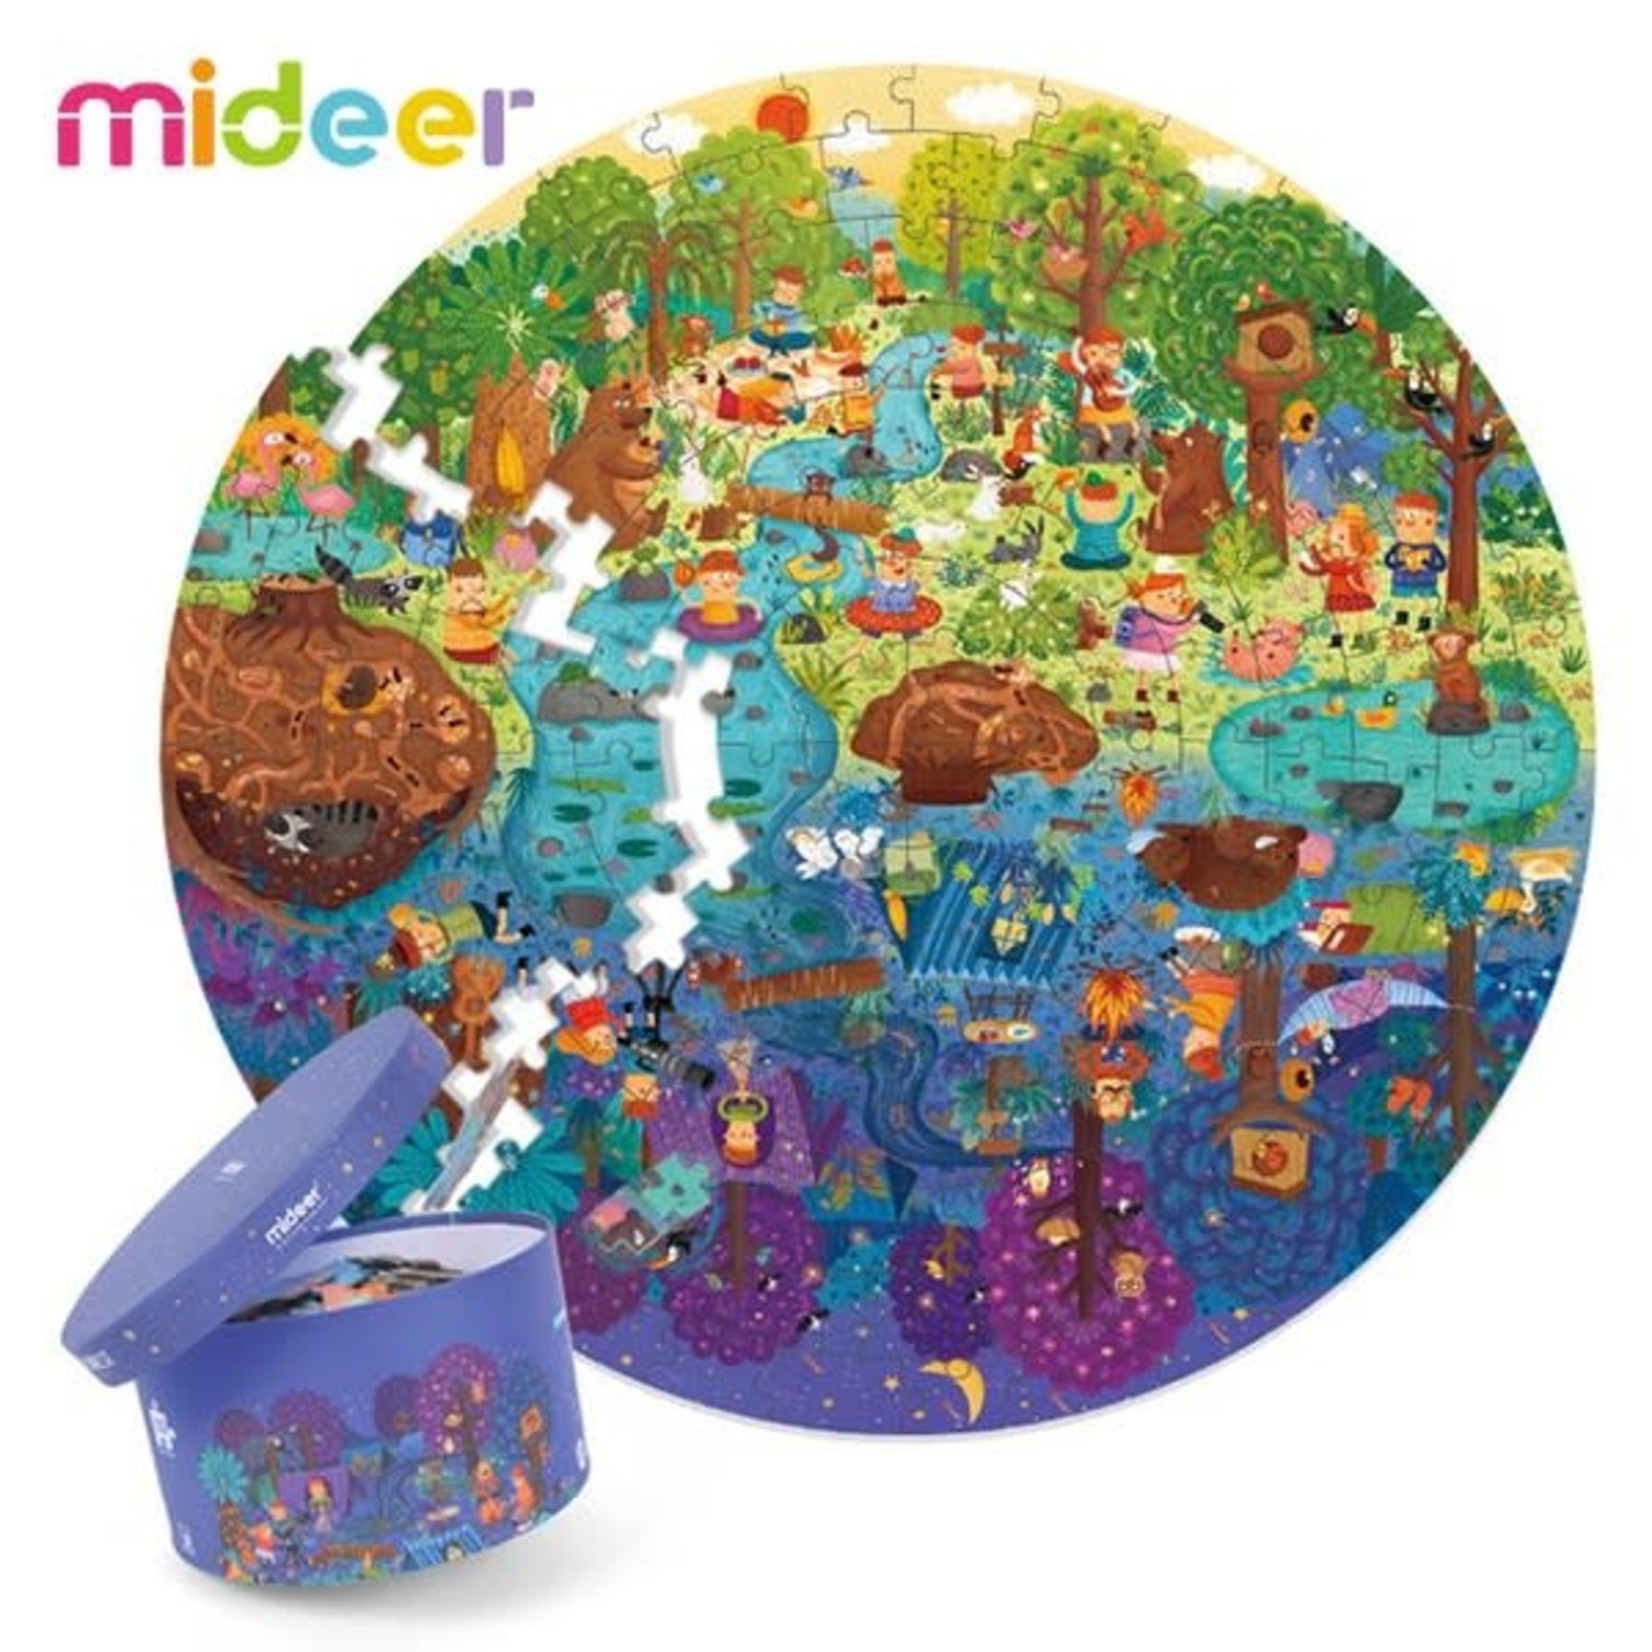 Mideer Mideer Day In Forest Puzzle (150pc)